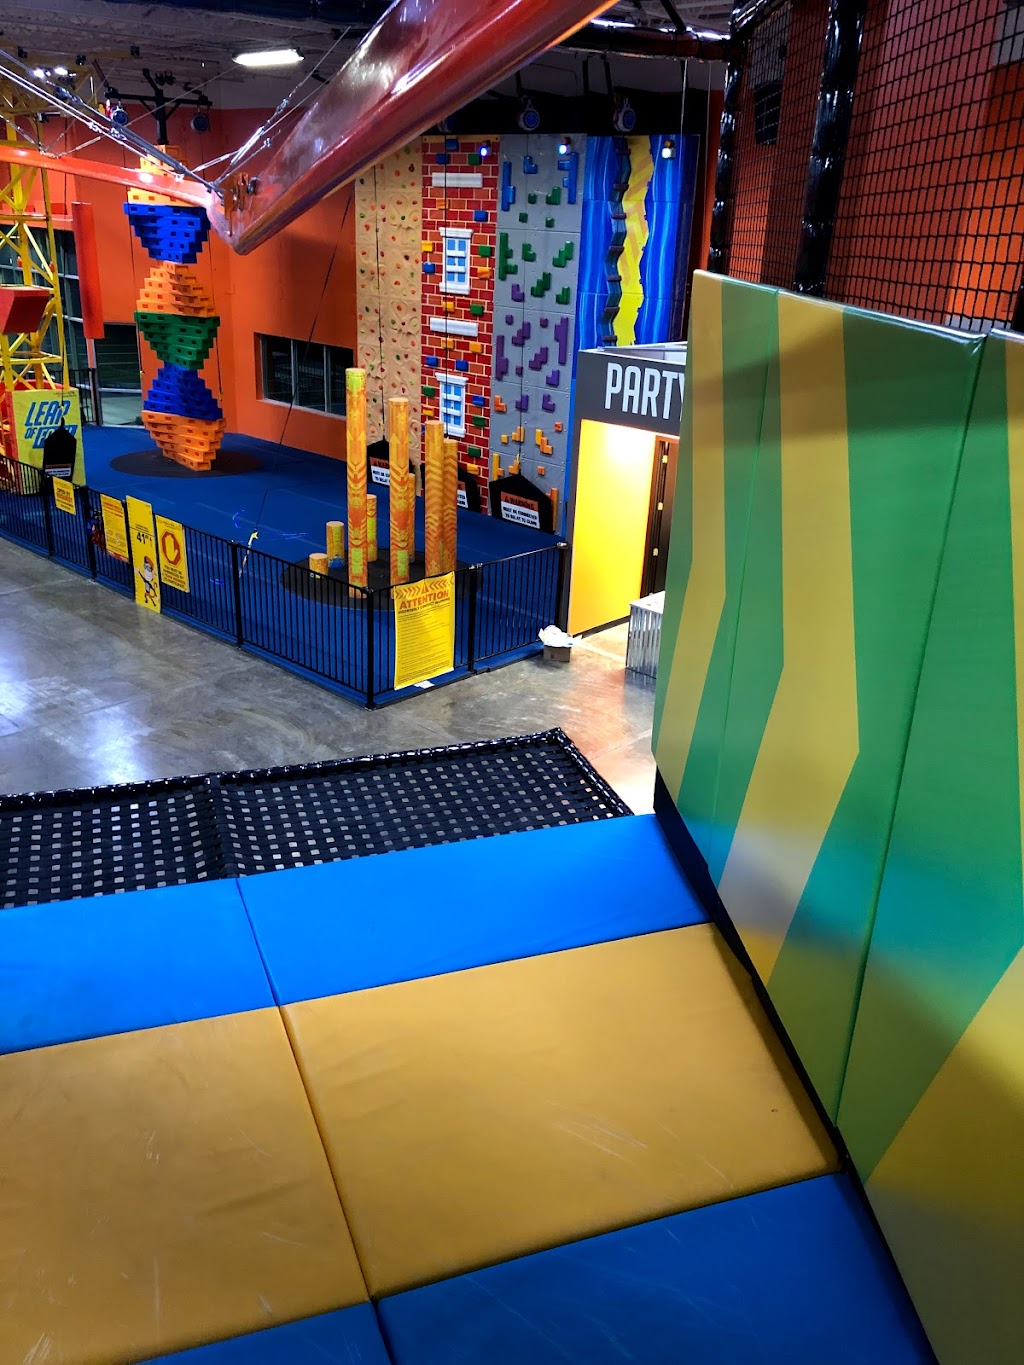 Urban Air Trampoline and Adventure Park | Photo 9 of 10 | Address: 3580 Holly Ln N, Plymouth, MN 55447, USA | Phone: (763) 307-1003